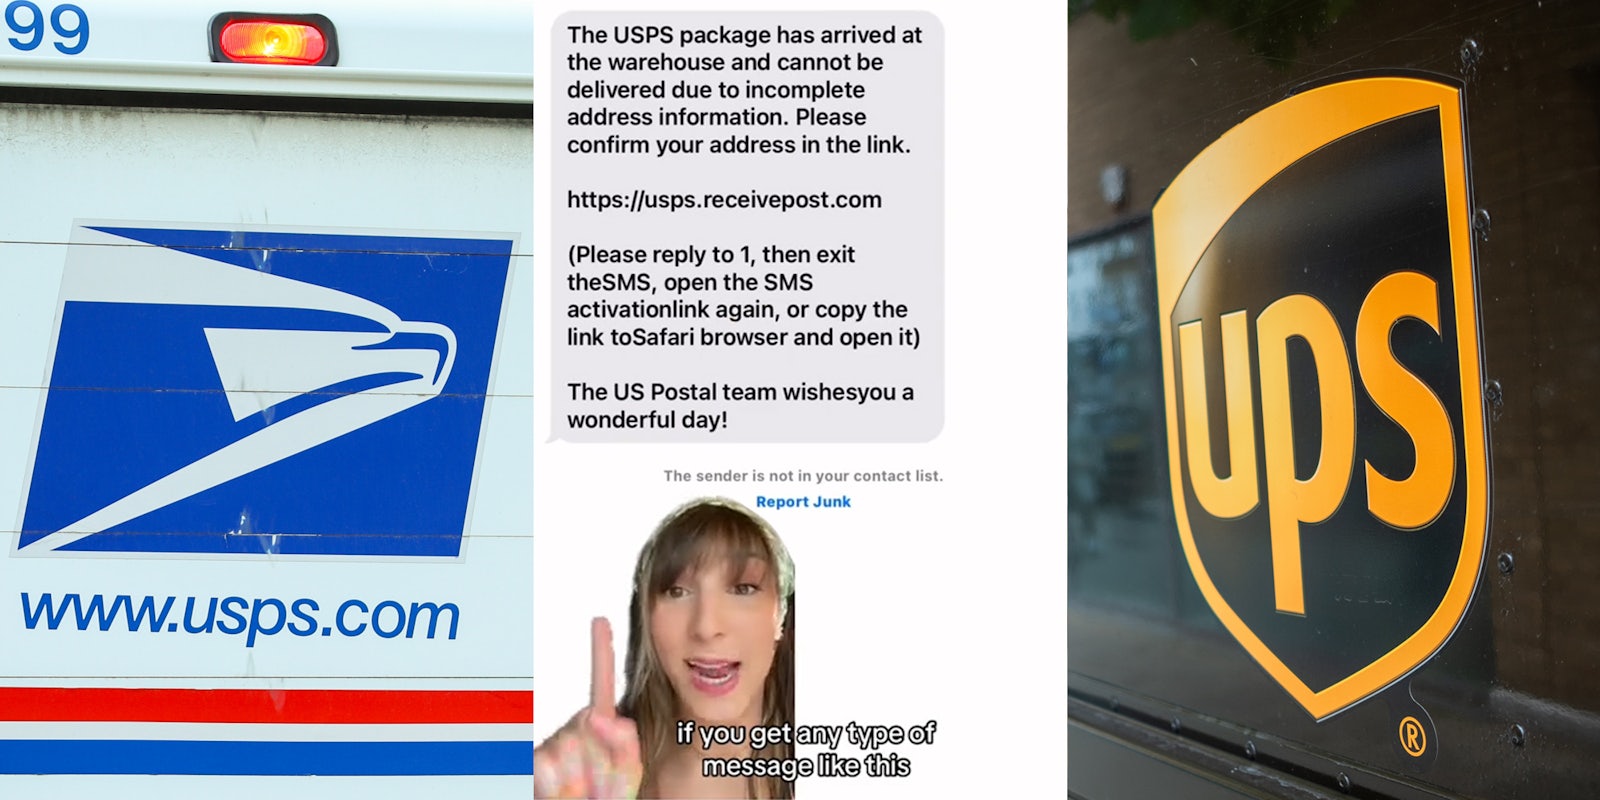 USPS logo on truck (l) woman greenscreen TikTok over USPS message with caption 'if you get any type of message like this' (c) UPS logo on truck (r)